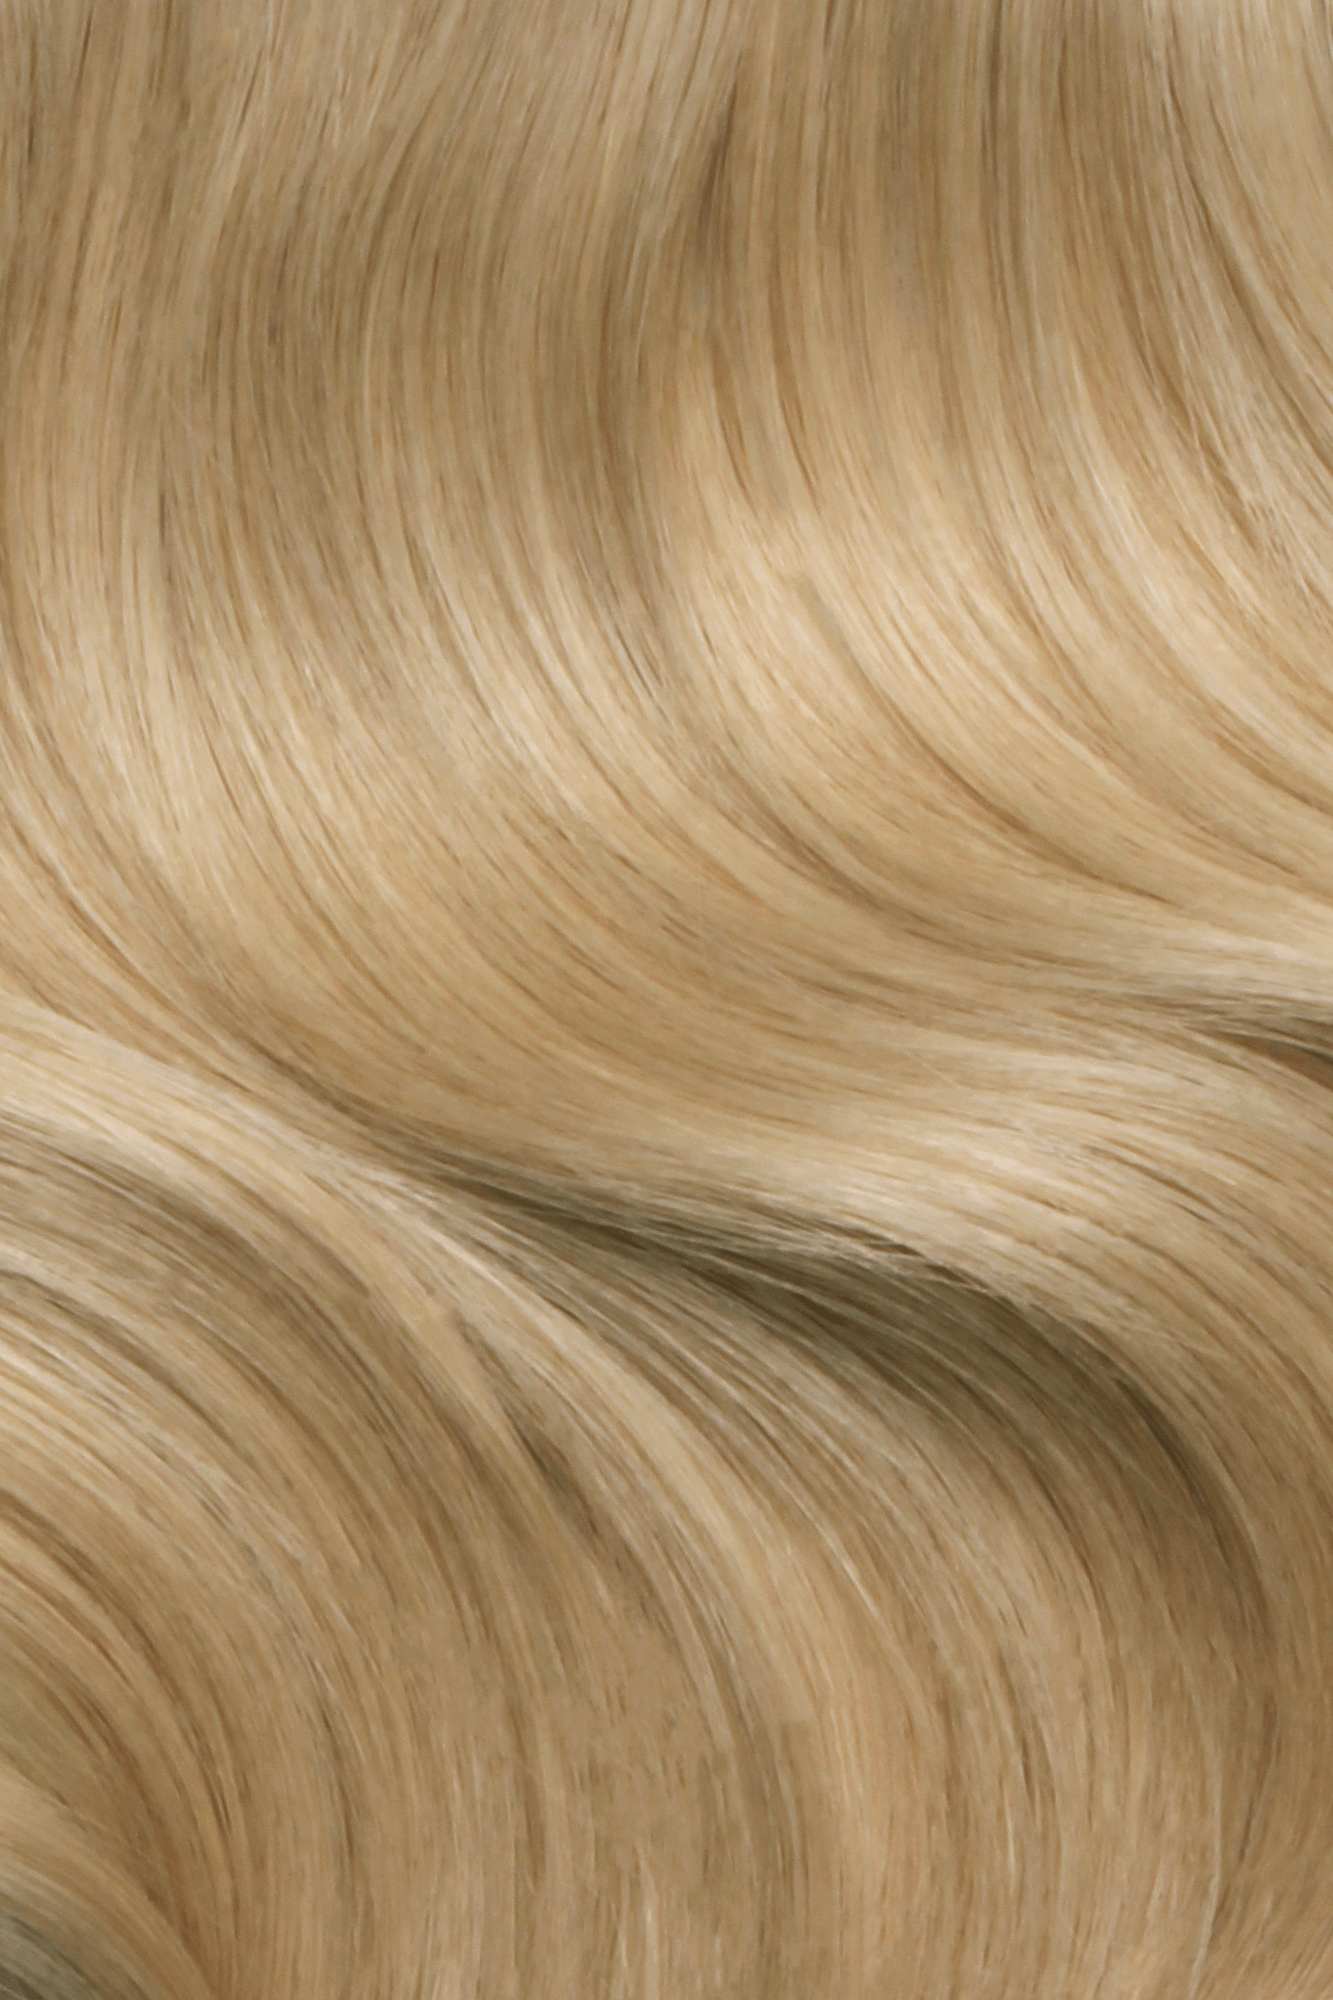 SEAMLESS® Tapes 24 Inches - SWAY Hair Extensions Beach-Ash-Blonde-9-613 SWAY SEAMLESS® Tapes 24 Inches - Natural, lightweight hair extensions for longer, fuller, and luxurious hair. Virtually undetectable, reusable, and perfect for any hairstyle